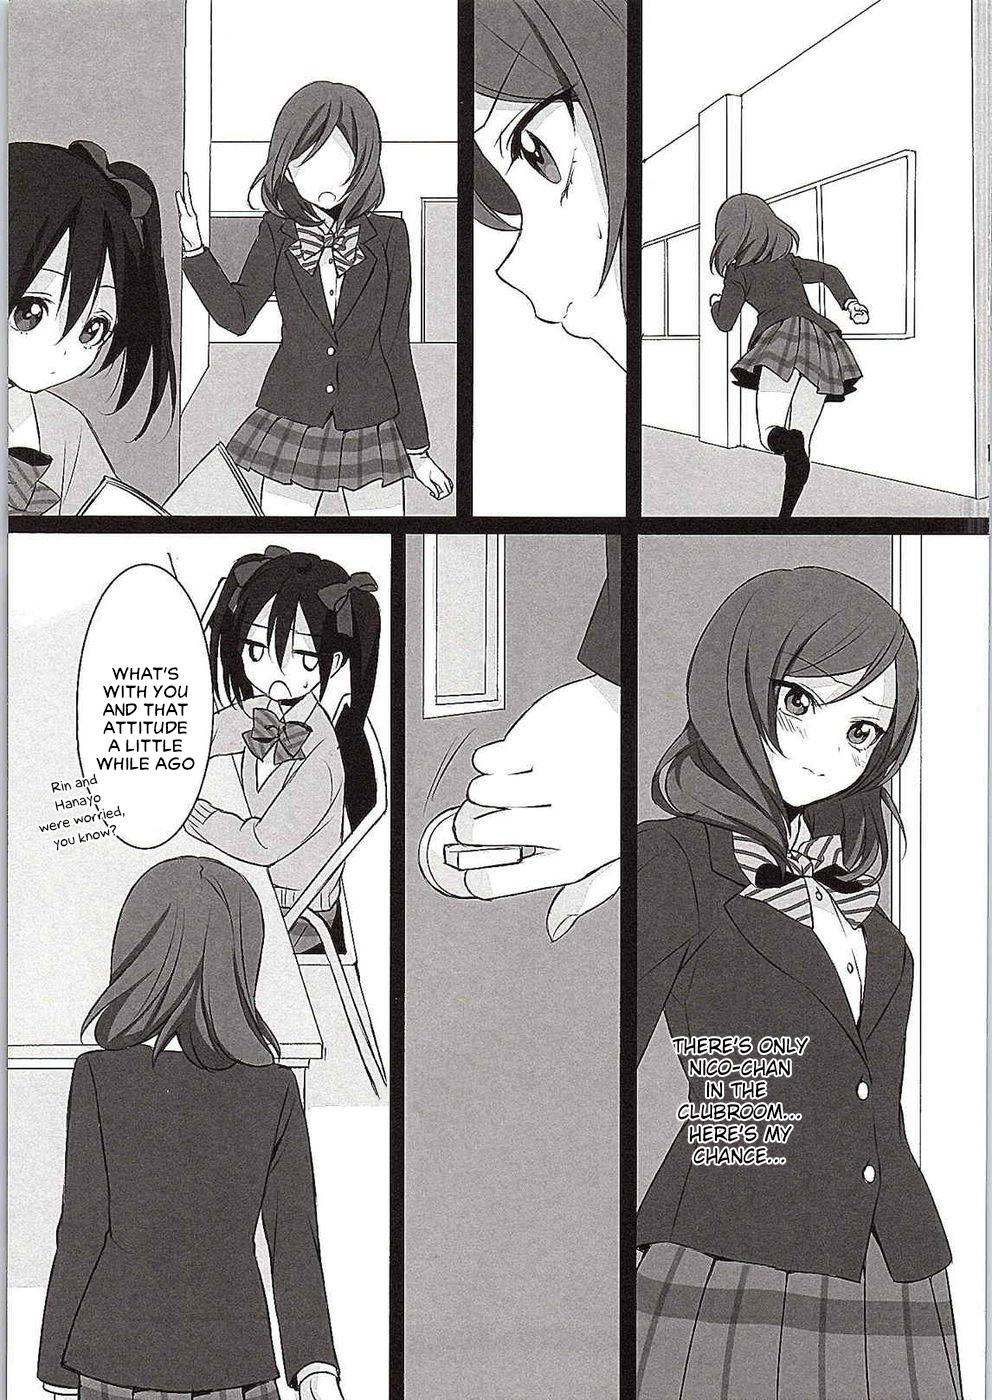 Plumper Want Me! - Love live Dicksucking - Page 10